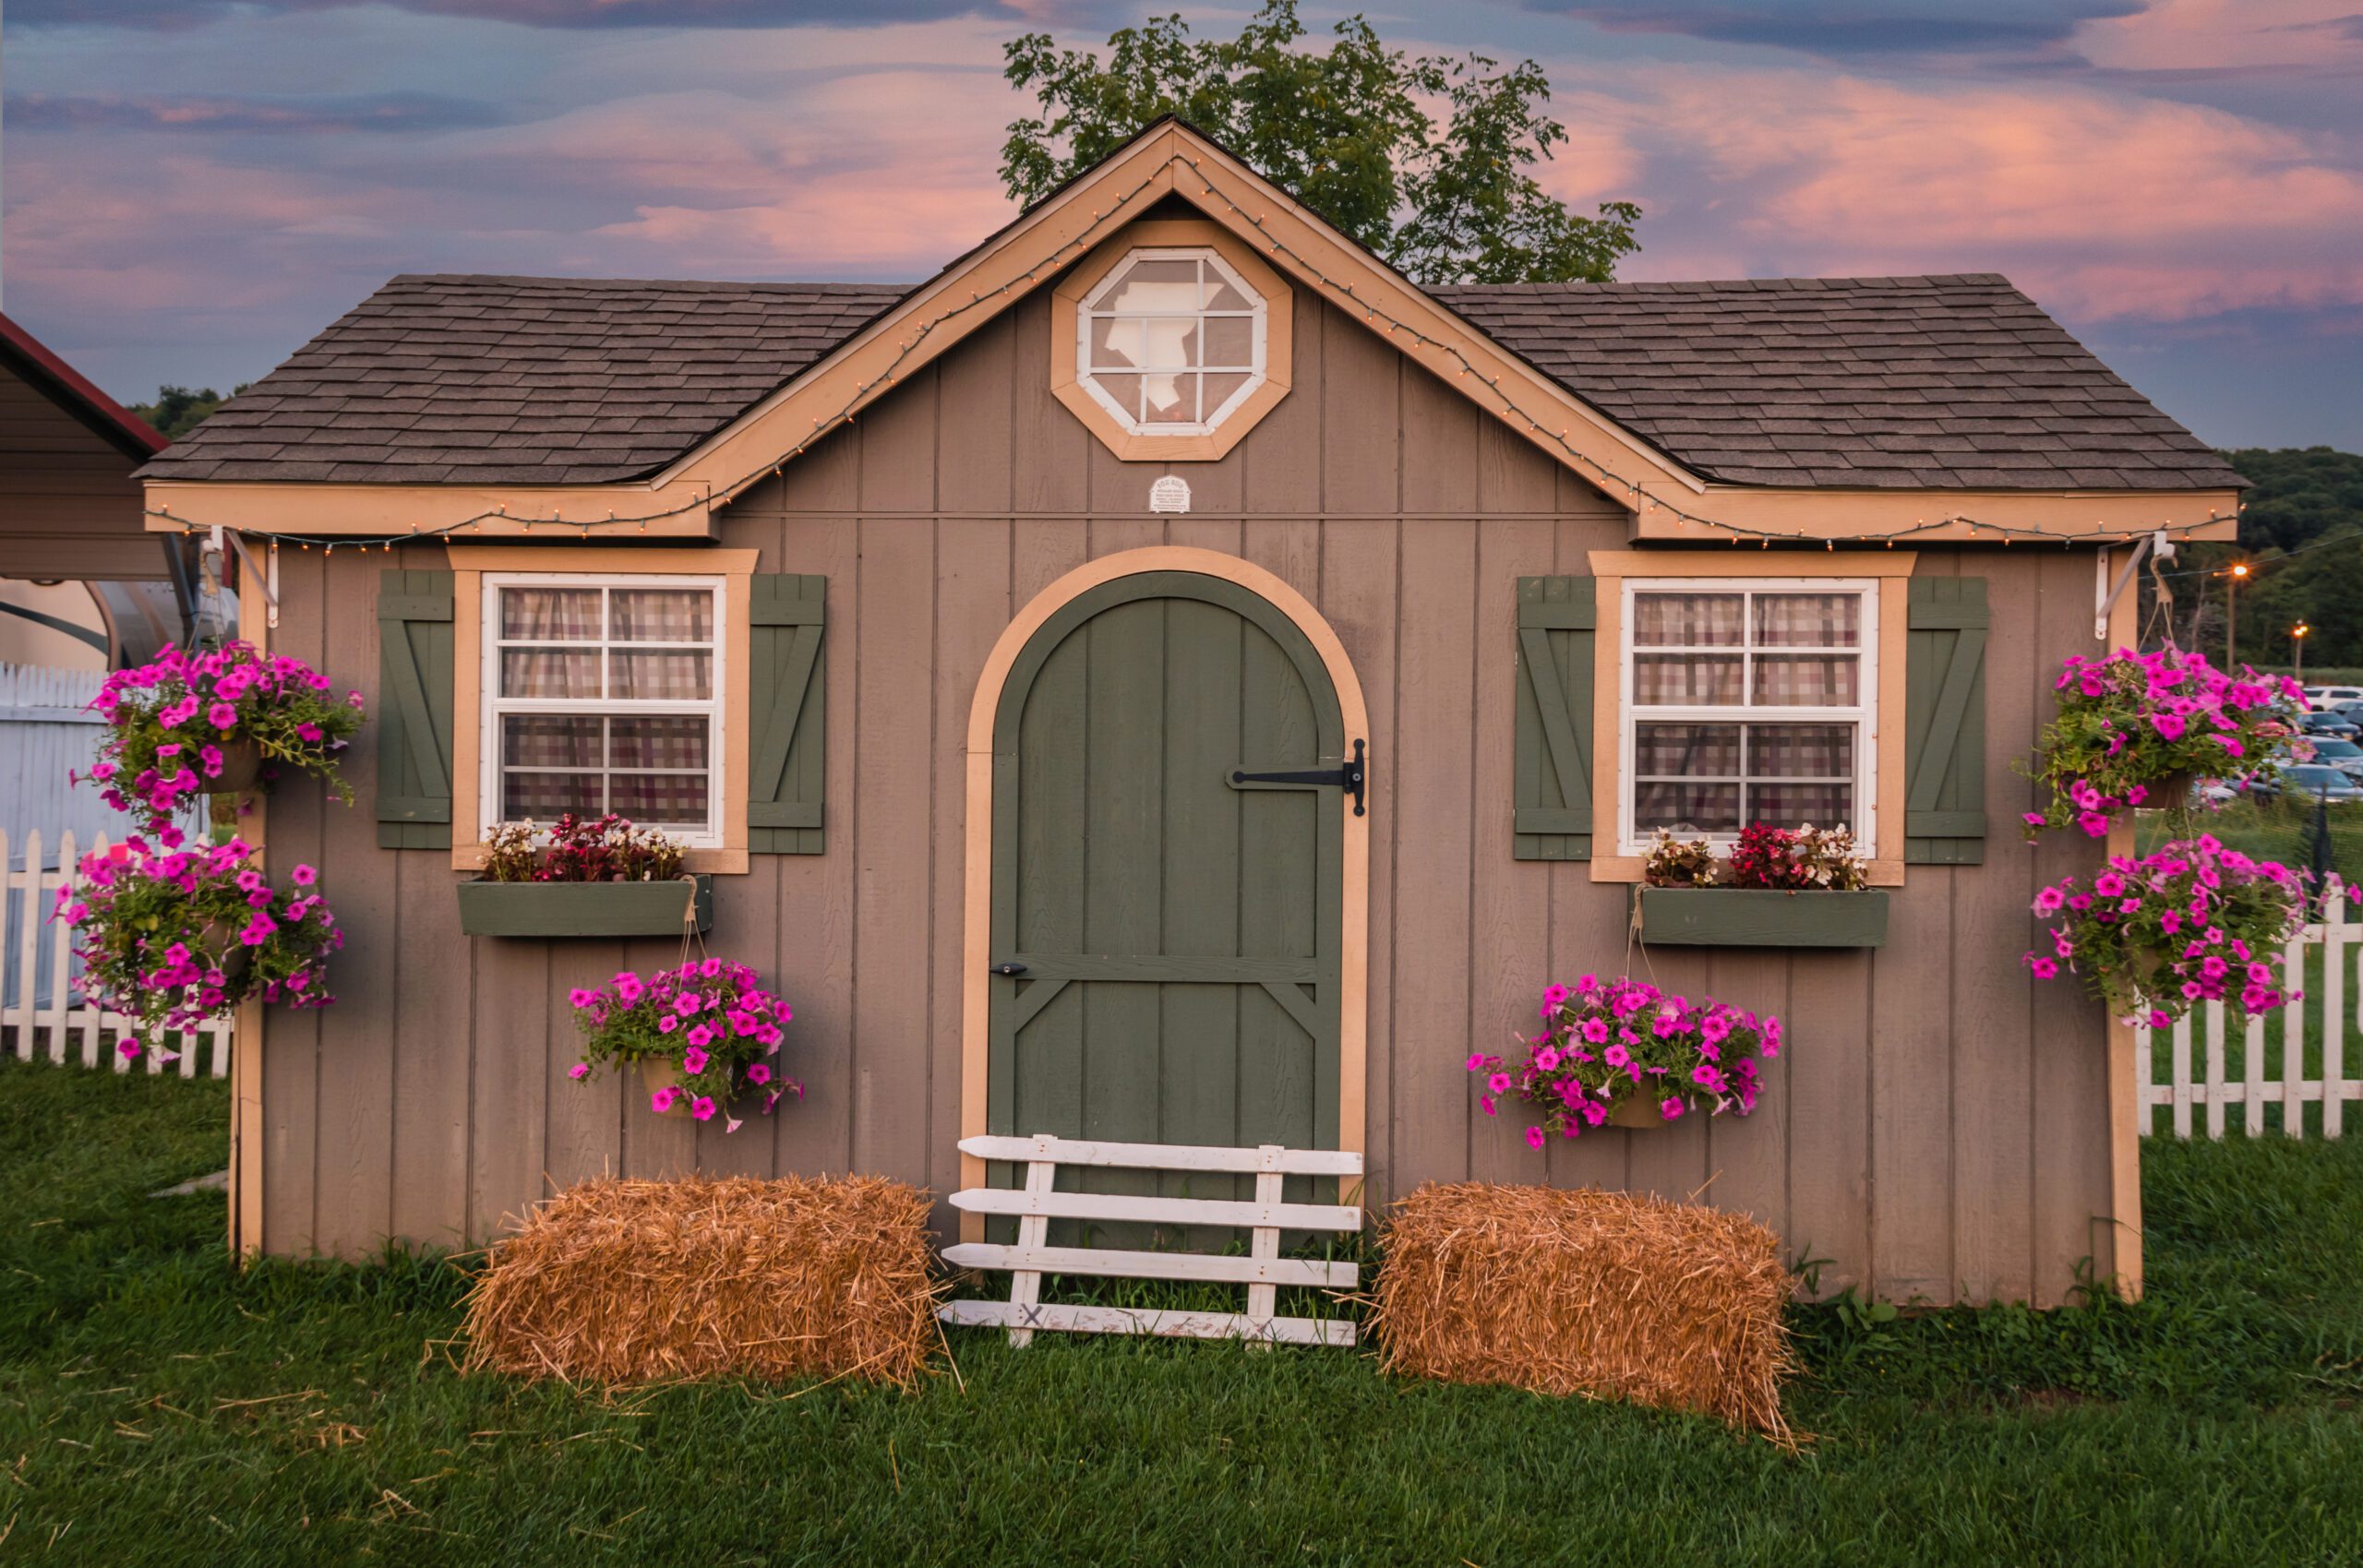 Best-Ever Mother’s Day Gift—Get Her a She-Shed!